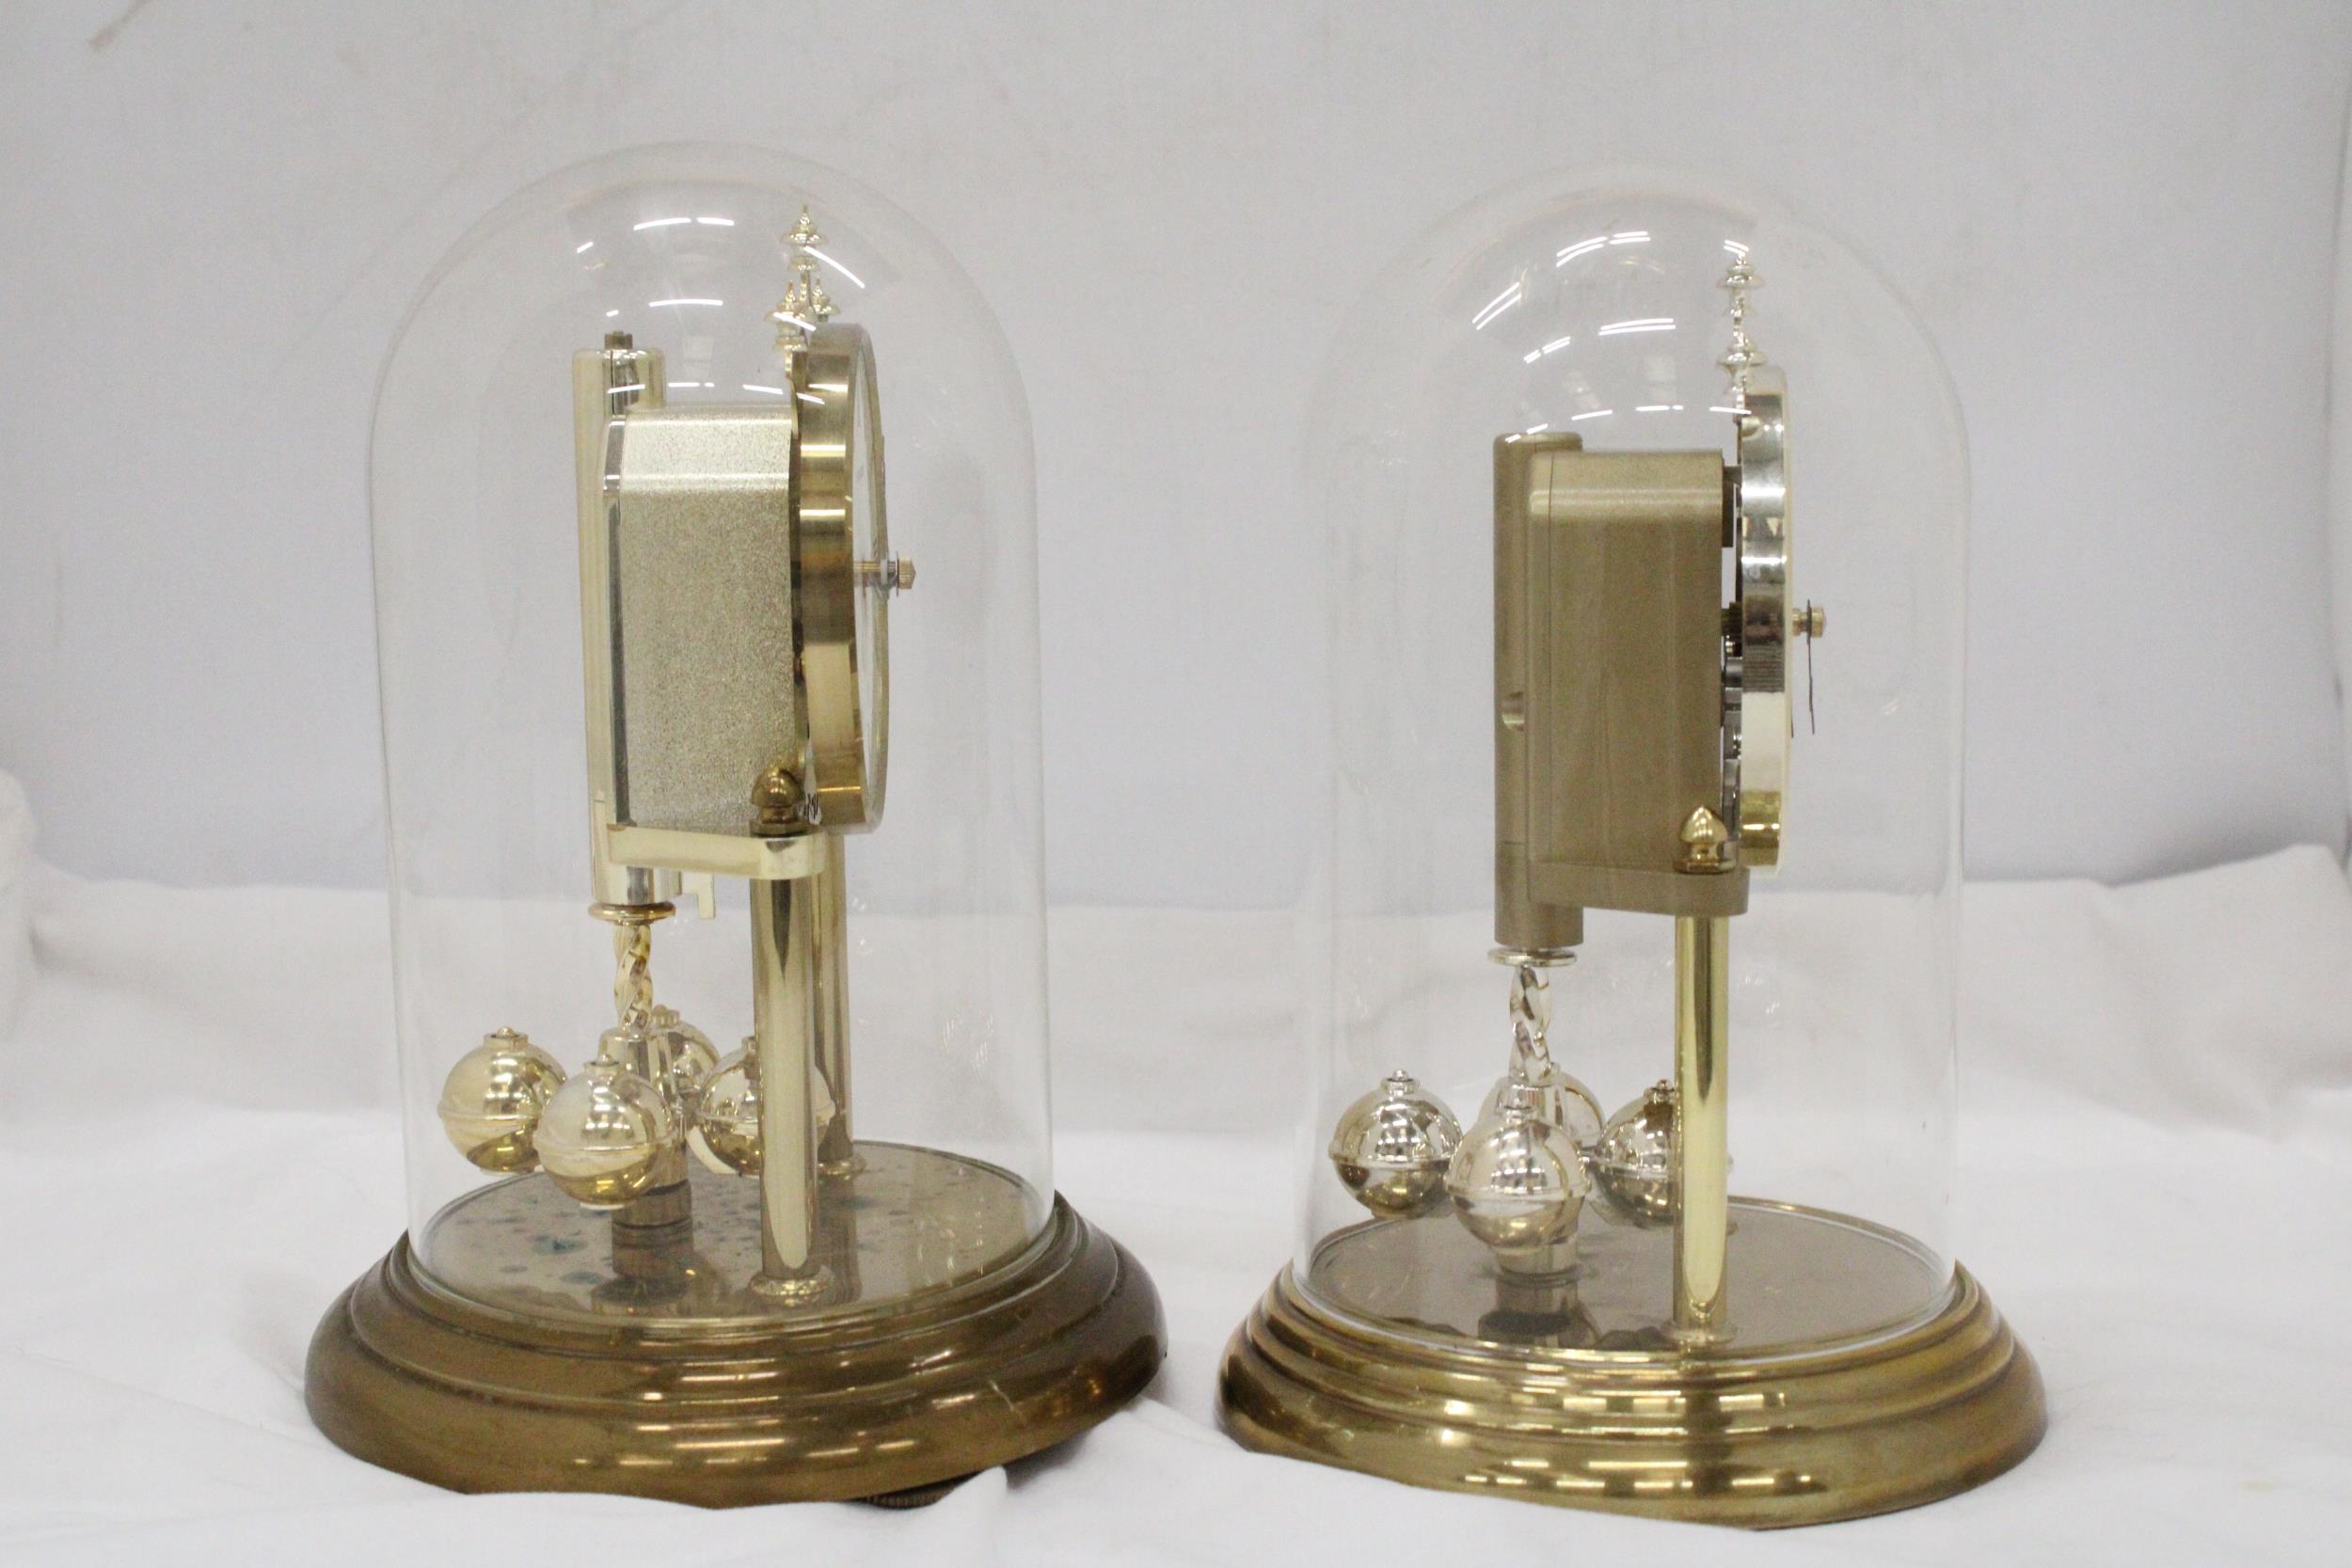 TWO BRASS ANNIVERSARY CLOCKS WITH GLASS DOMES - Image 4 of 6